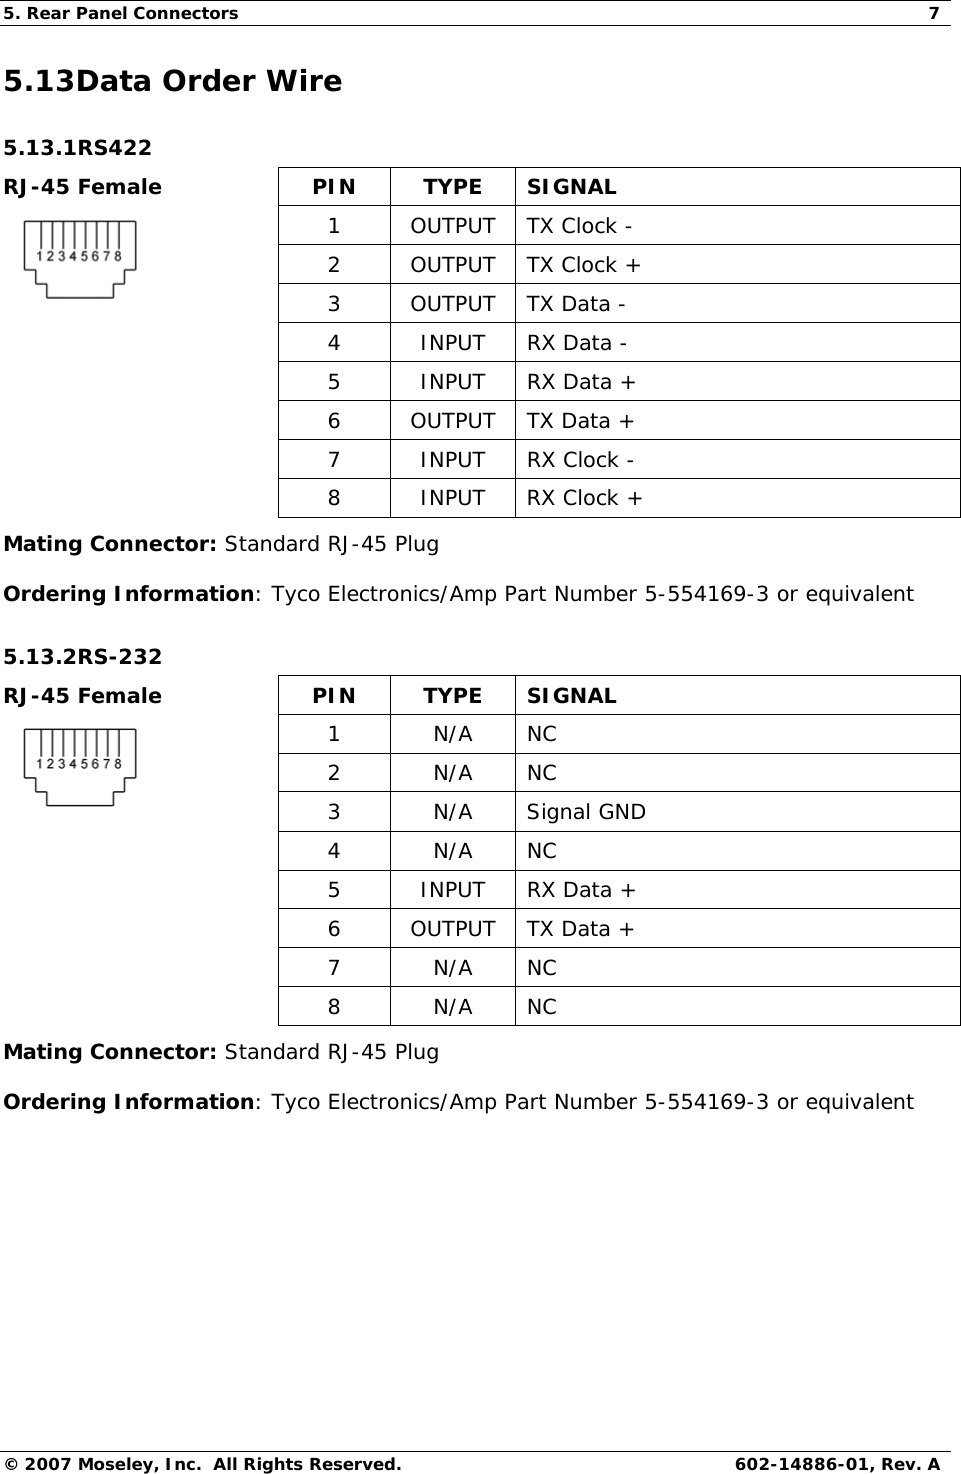 5. Rear Panel Connectors  7 © 2007 Moseley, Inc.  All Rights Reserved.  602-14886-01, Rev. A 5.13Data Order Wire 5.13.1RS422 RJ-45 Female  PIN  TYPE  SIGNAL 1 OUTPUT TX Clock - 2 OUTPUT TX Clock +  3  OUTPUT  TX Data -  4 INPUT RX Data -  5 INPUT RX Data +   6  OUTPUT  TX Data +   7  INPUT  RX Clock -  8 INPUT RX Clock + Mating Connector: Standard RJ-45 Plug Ordering Information: Tyco Electronics/Amp Part Number 5-554169-3 or equivalent 5.13.2RS-232 RJ-45 Female  PIN  TYPE  SIGNAL 1 N/A NC 2 N/A NC  3 N/A Signal GND  4 N/A NC  5 INPUT RX Data +   6  OUTPUT  TX Data +  7 N/A NC  8 N/A NC Mating Connector: Standard RJ-45 Plug Ordering Information: Tyco Electronics/Amp Part Number 5-554169-3 or equivalent 